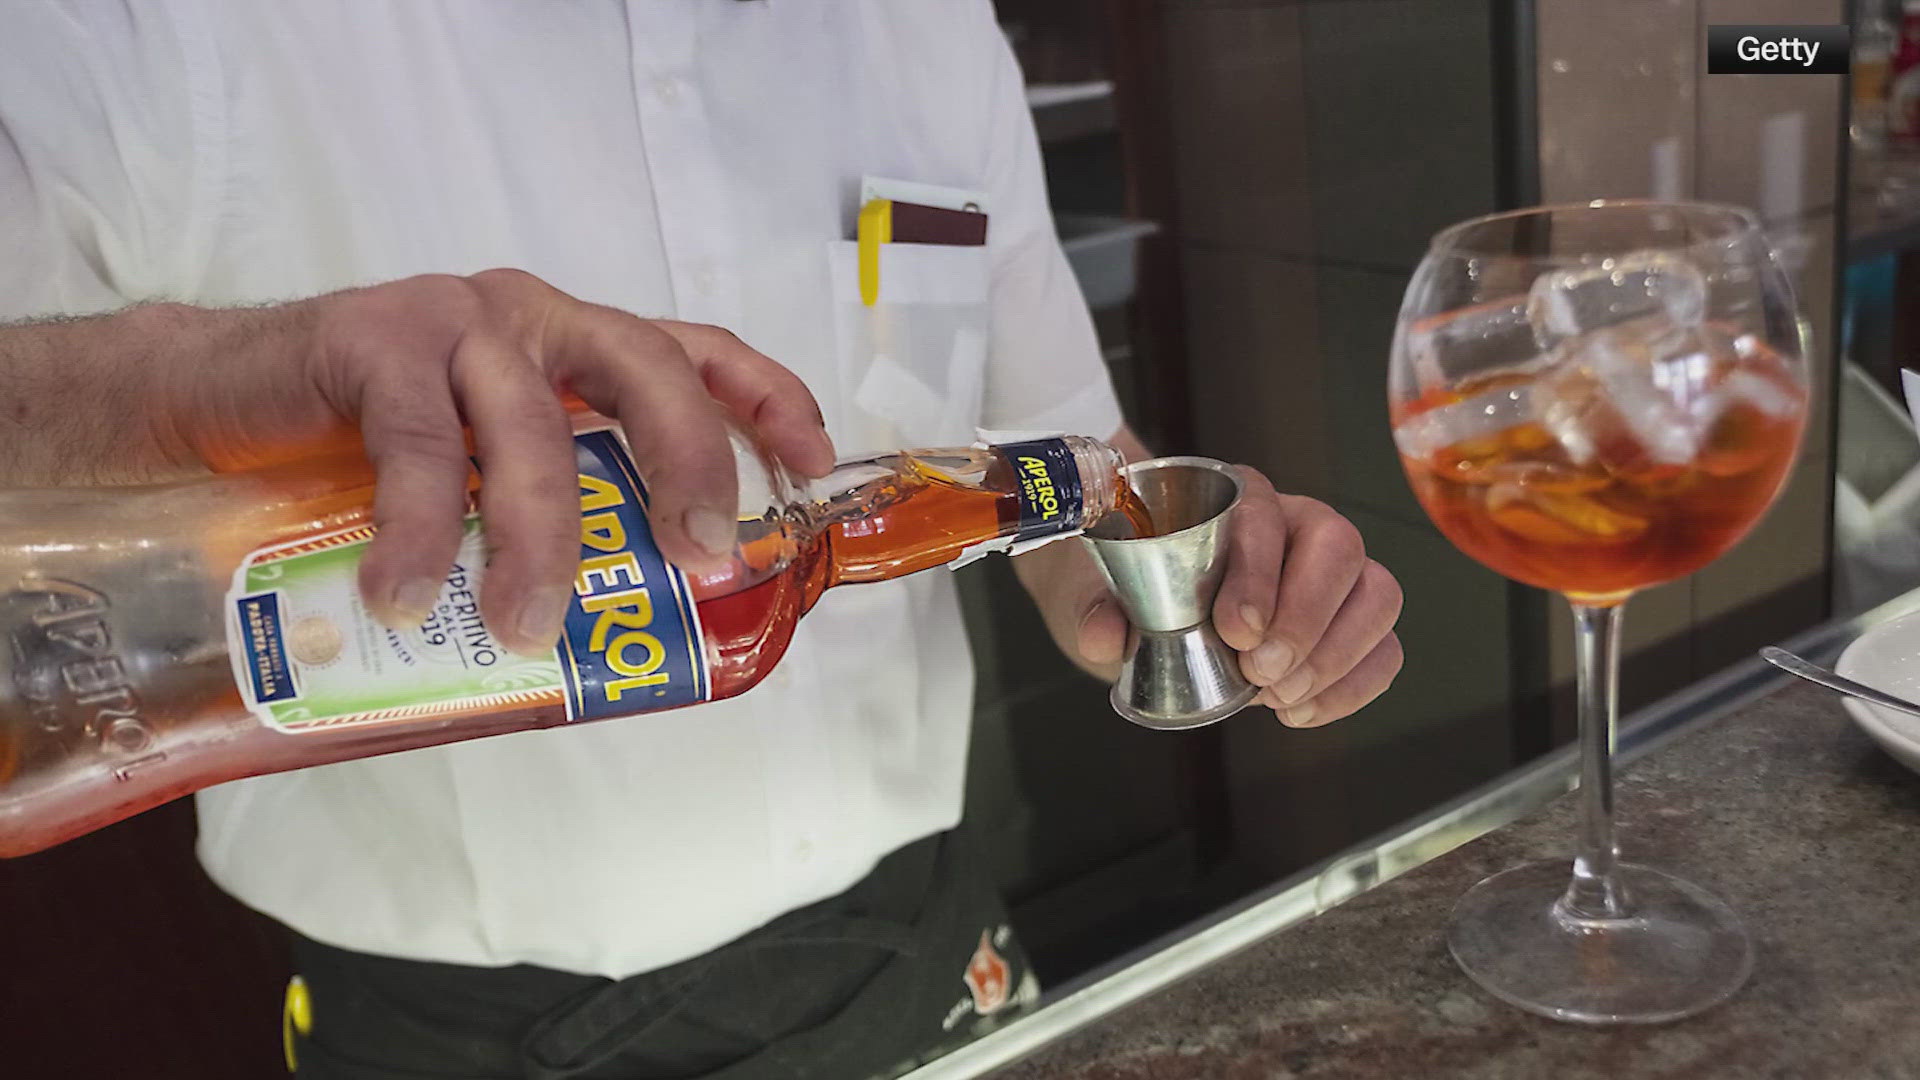 According to one study, America's favorite drink is Aperol Spritz.